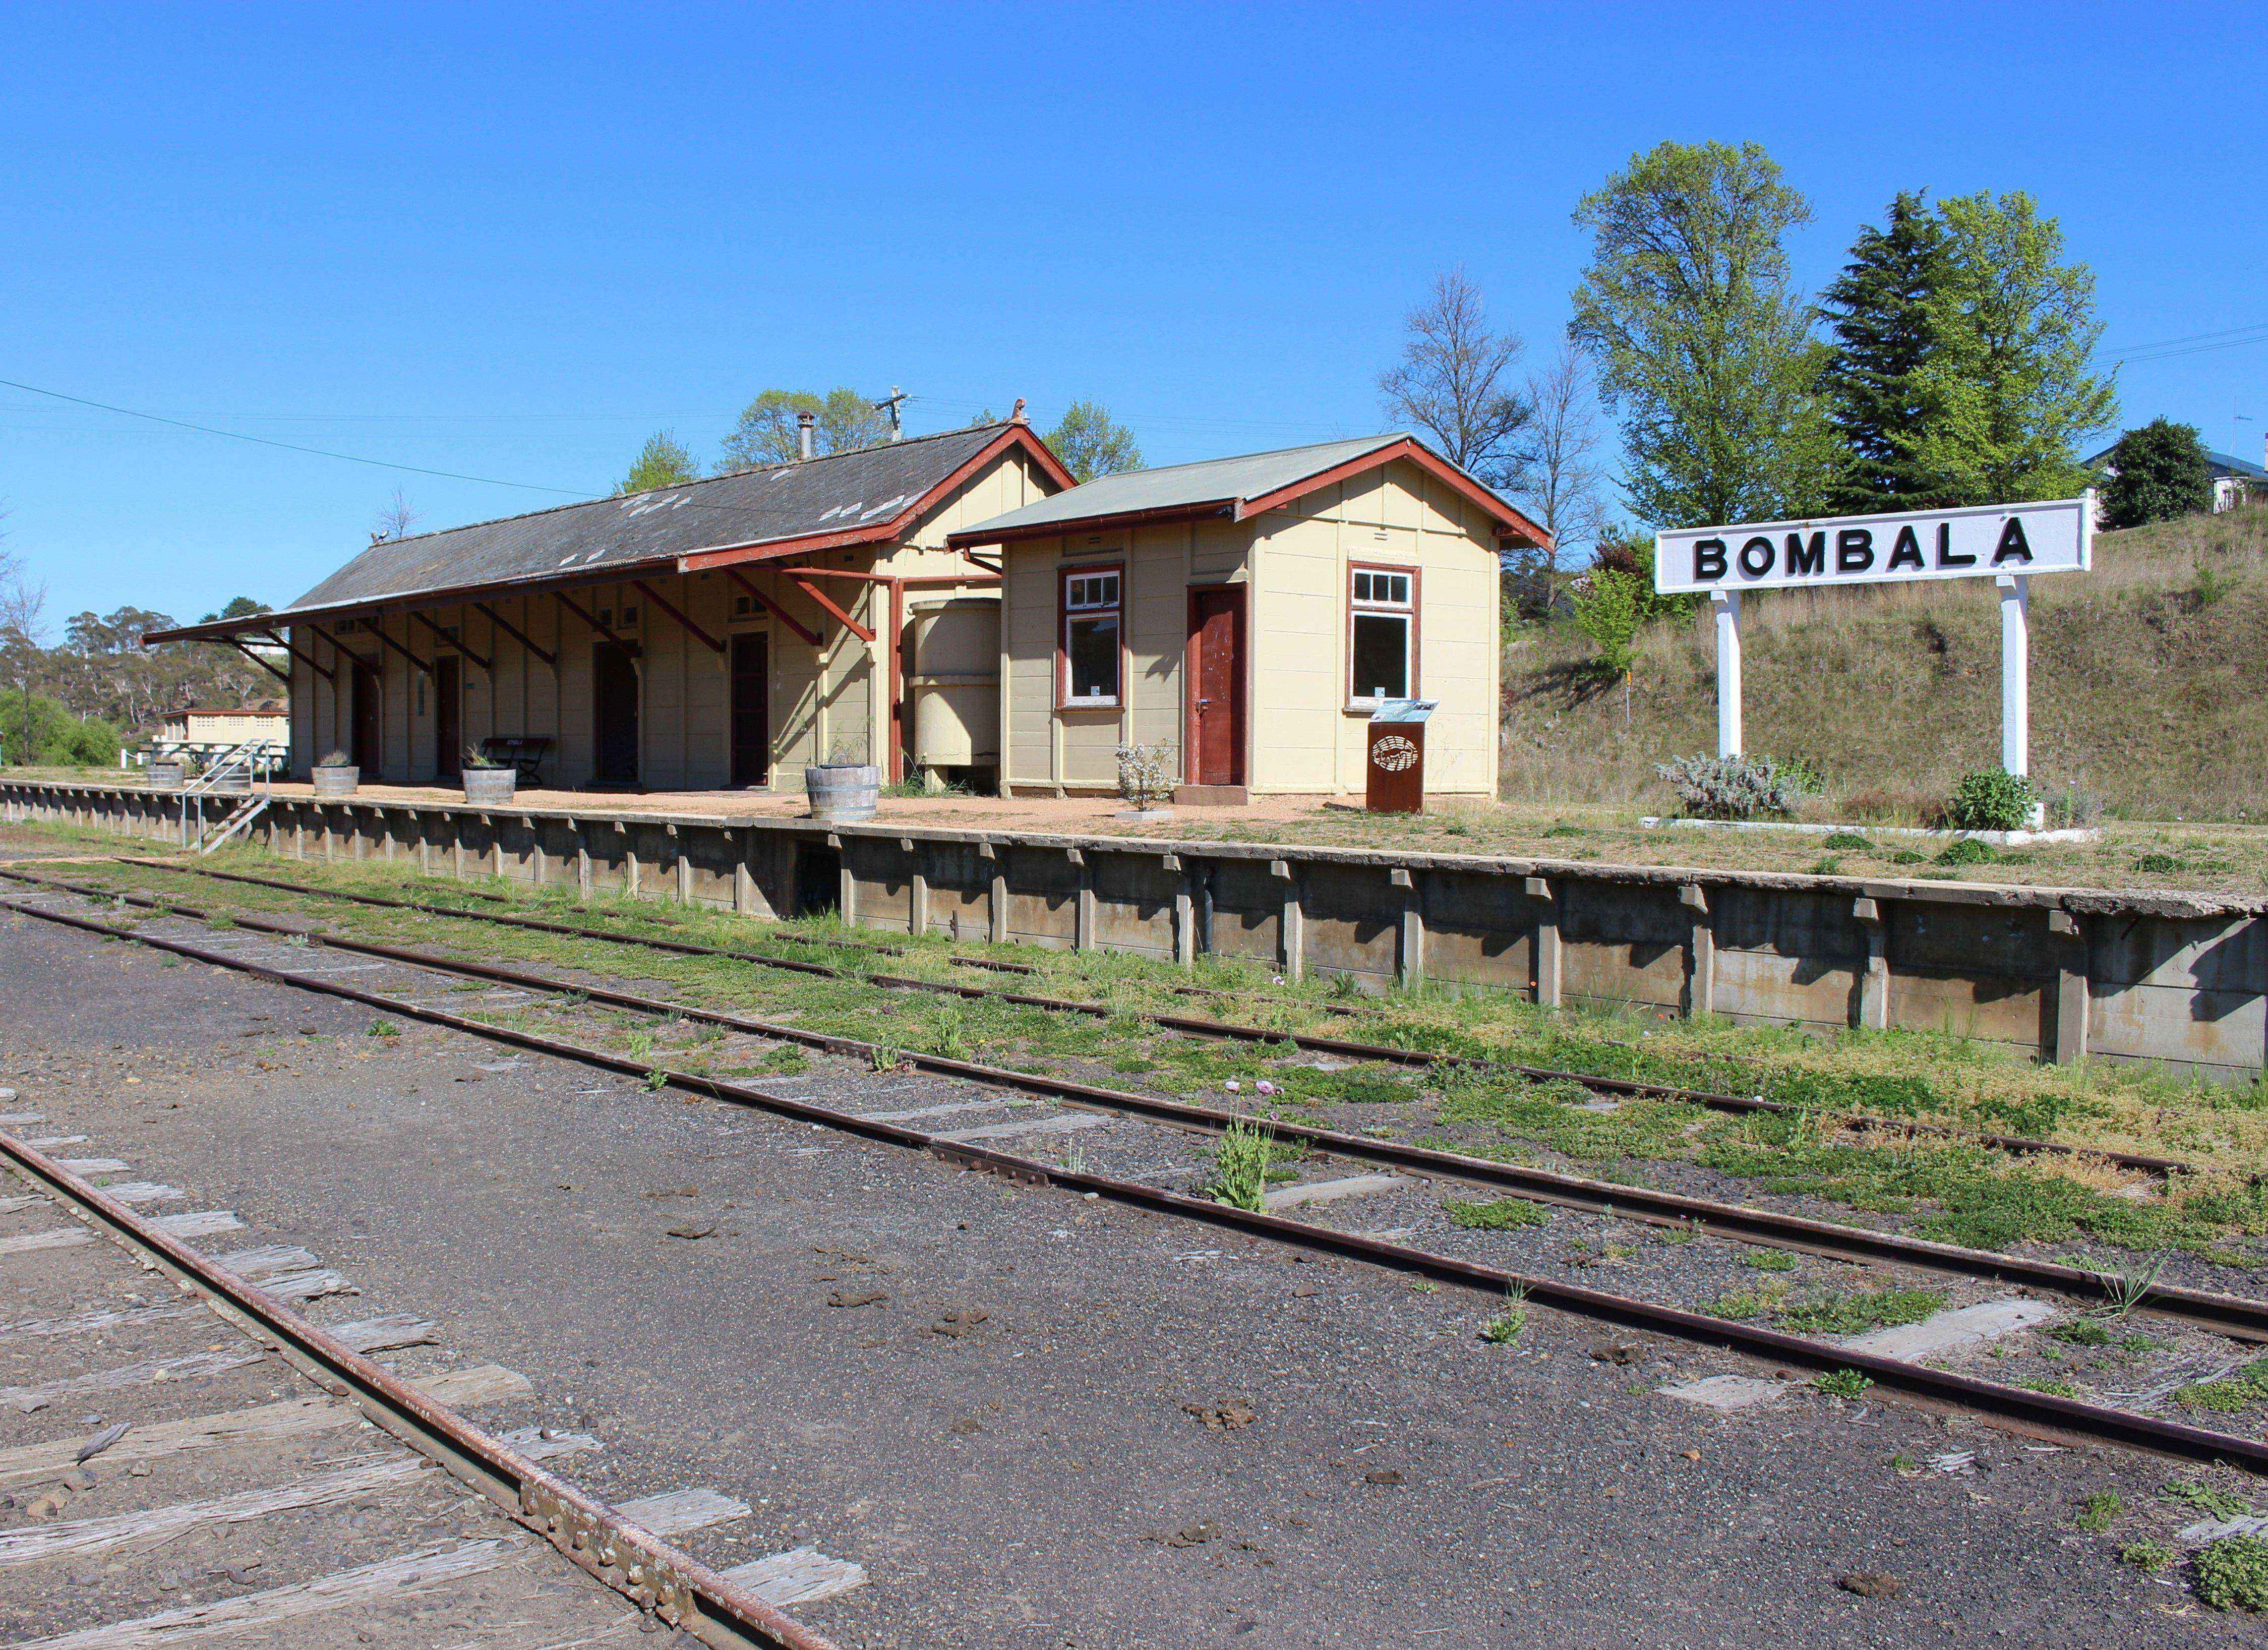 Community support not enough to make Canberra-Eden railway feasible